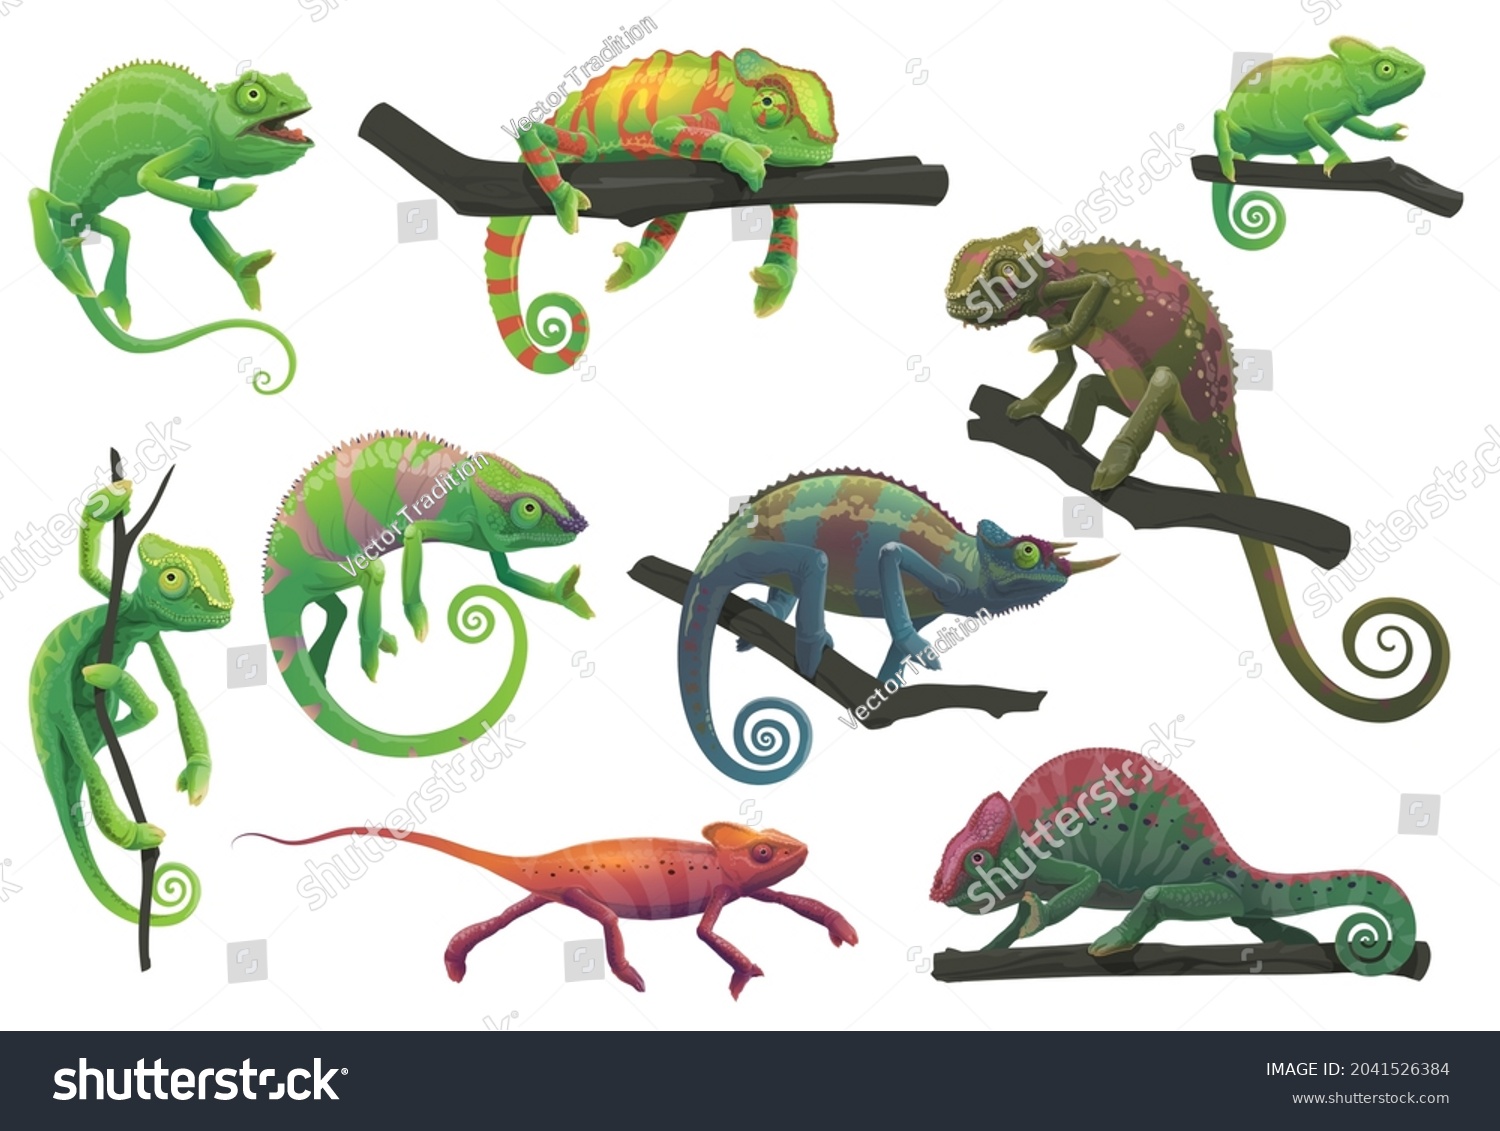 SVG of Chameleon lizards with tree branches vector set with cartoon reptile animals of panther, jackson, veiled, green and red chameleon in different poses. Lizards with camouflage skin, tropical wildlife svg